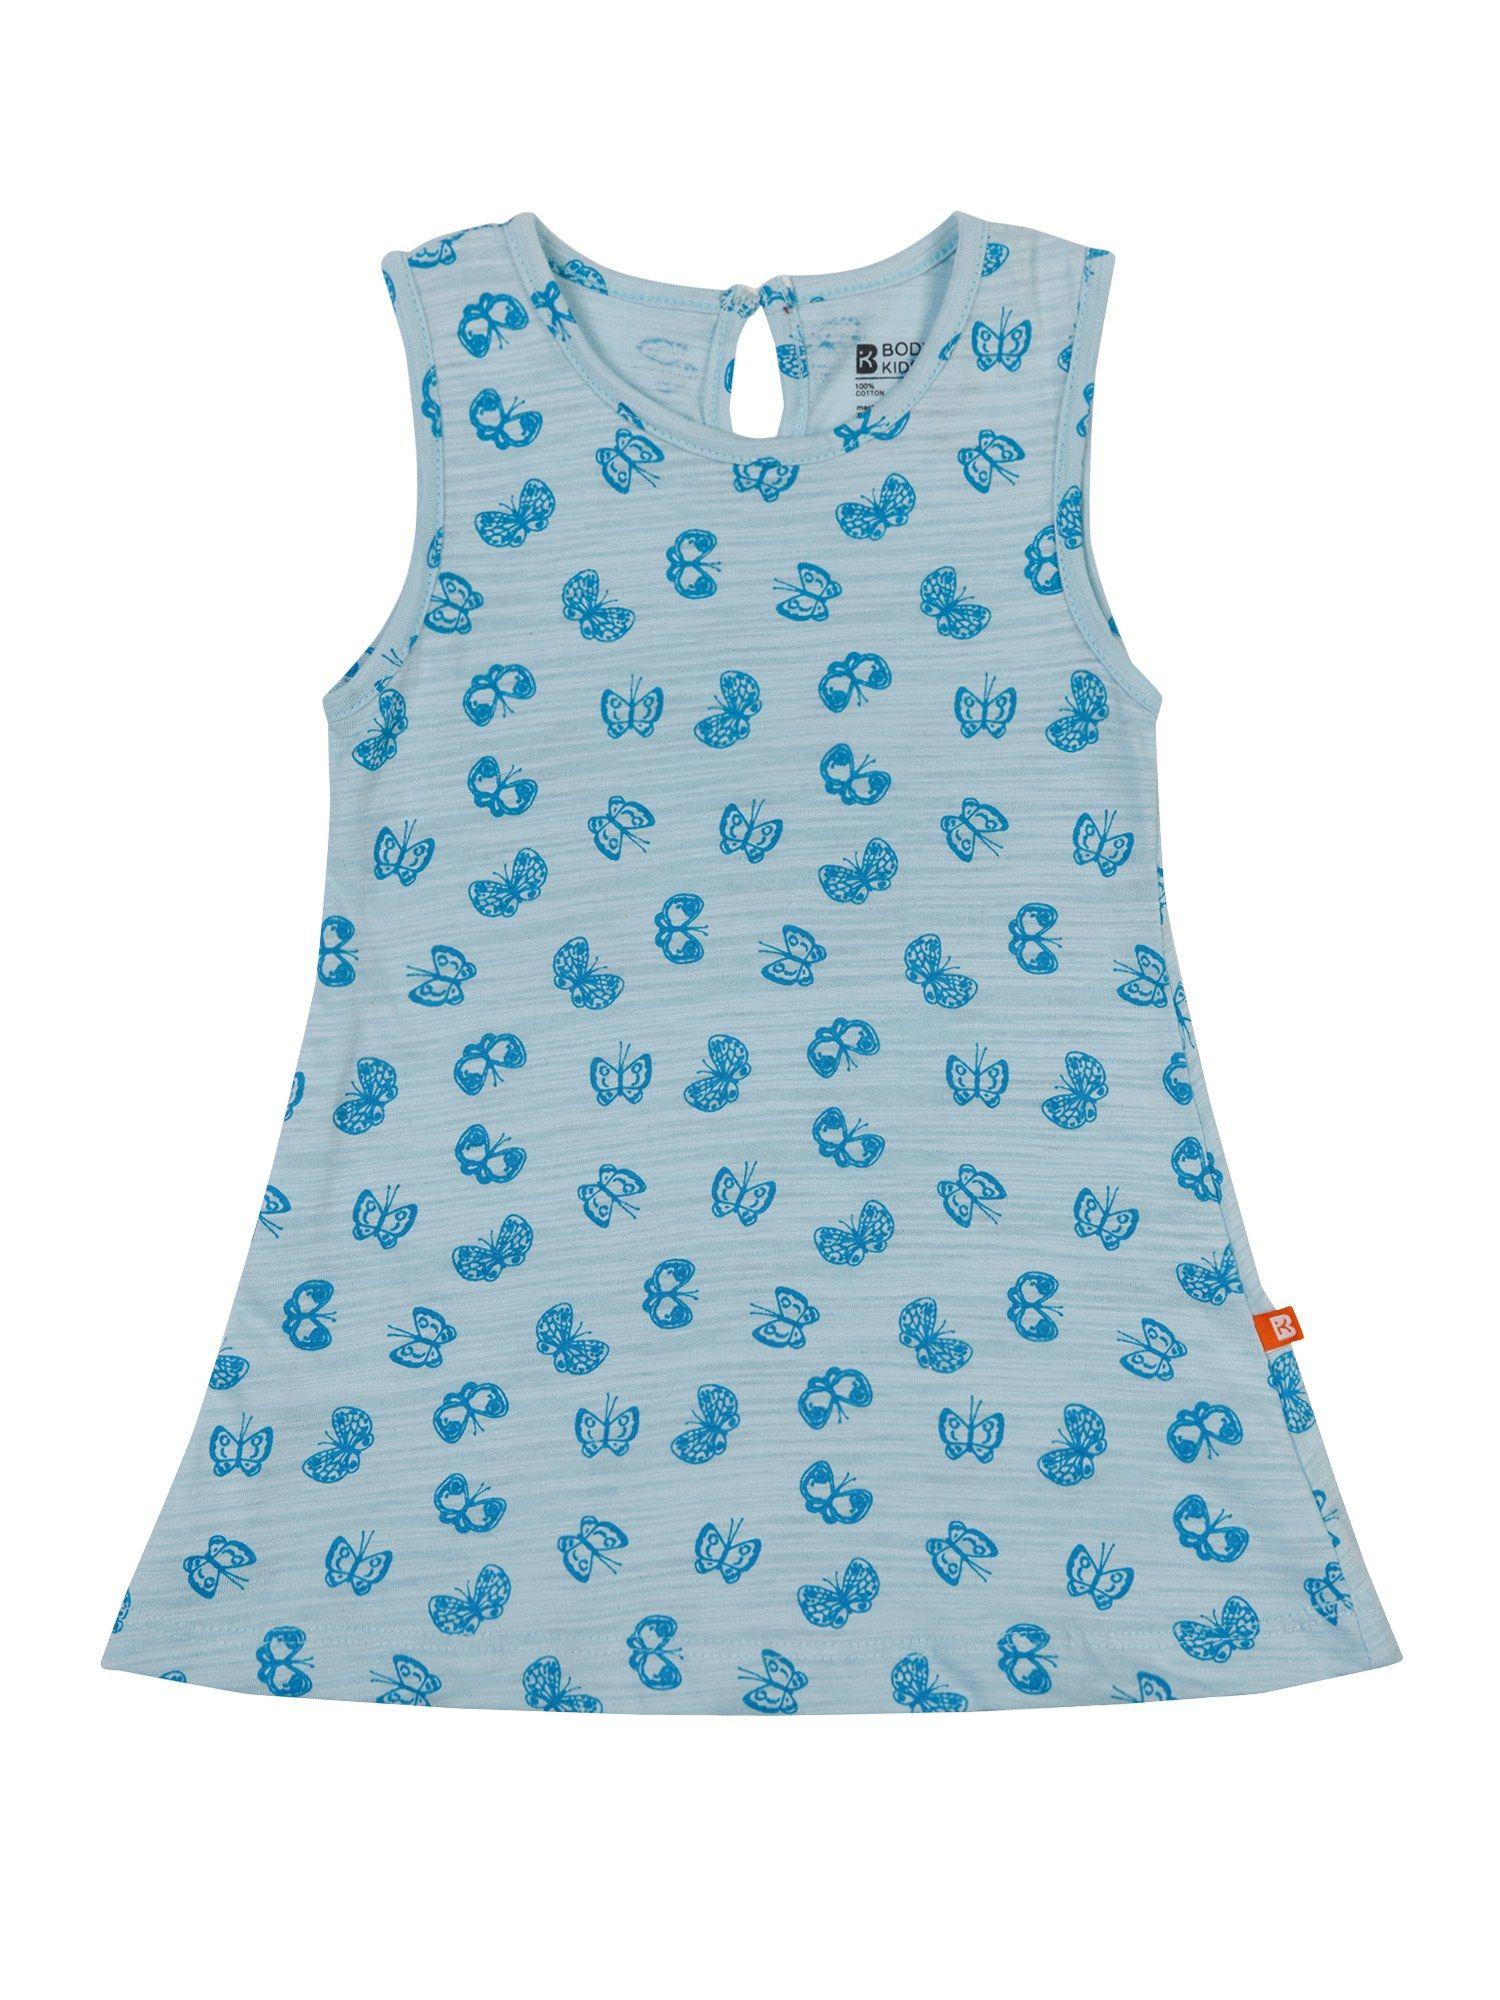 butterfly printed dress-blue